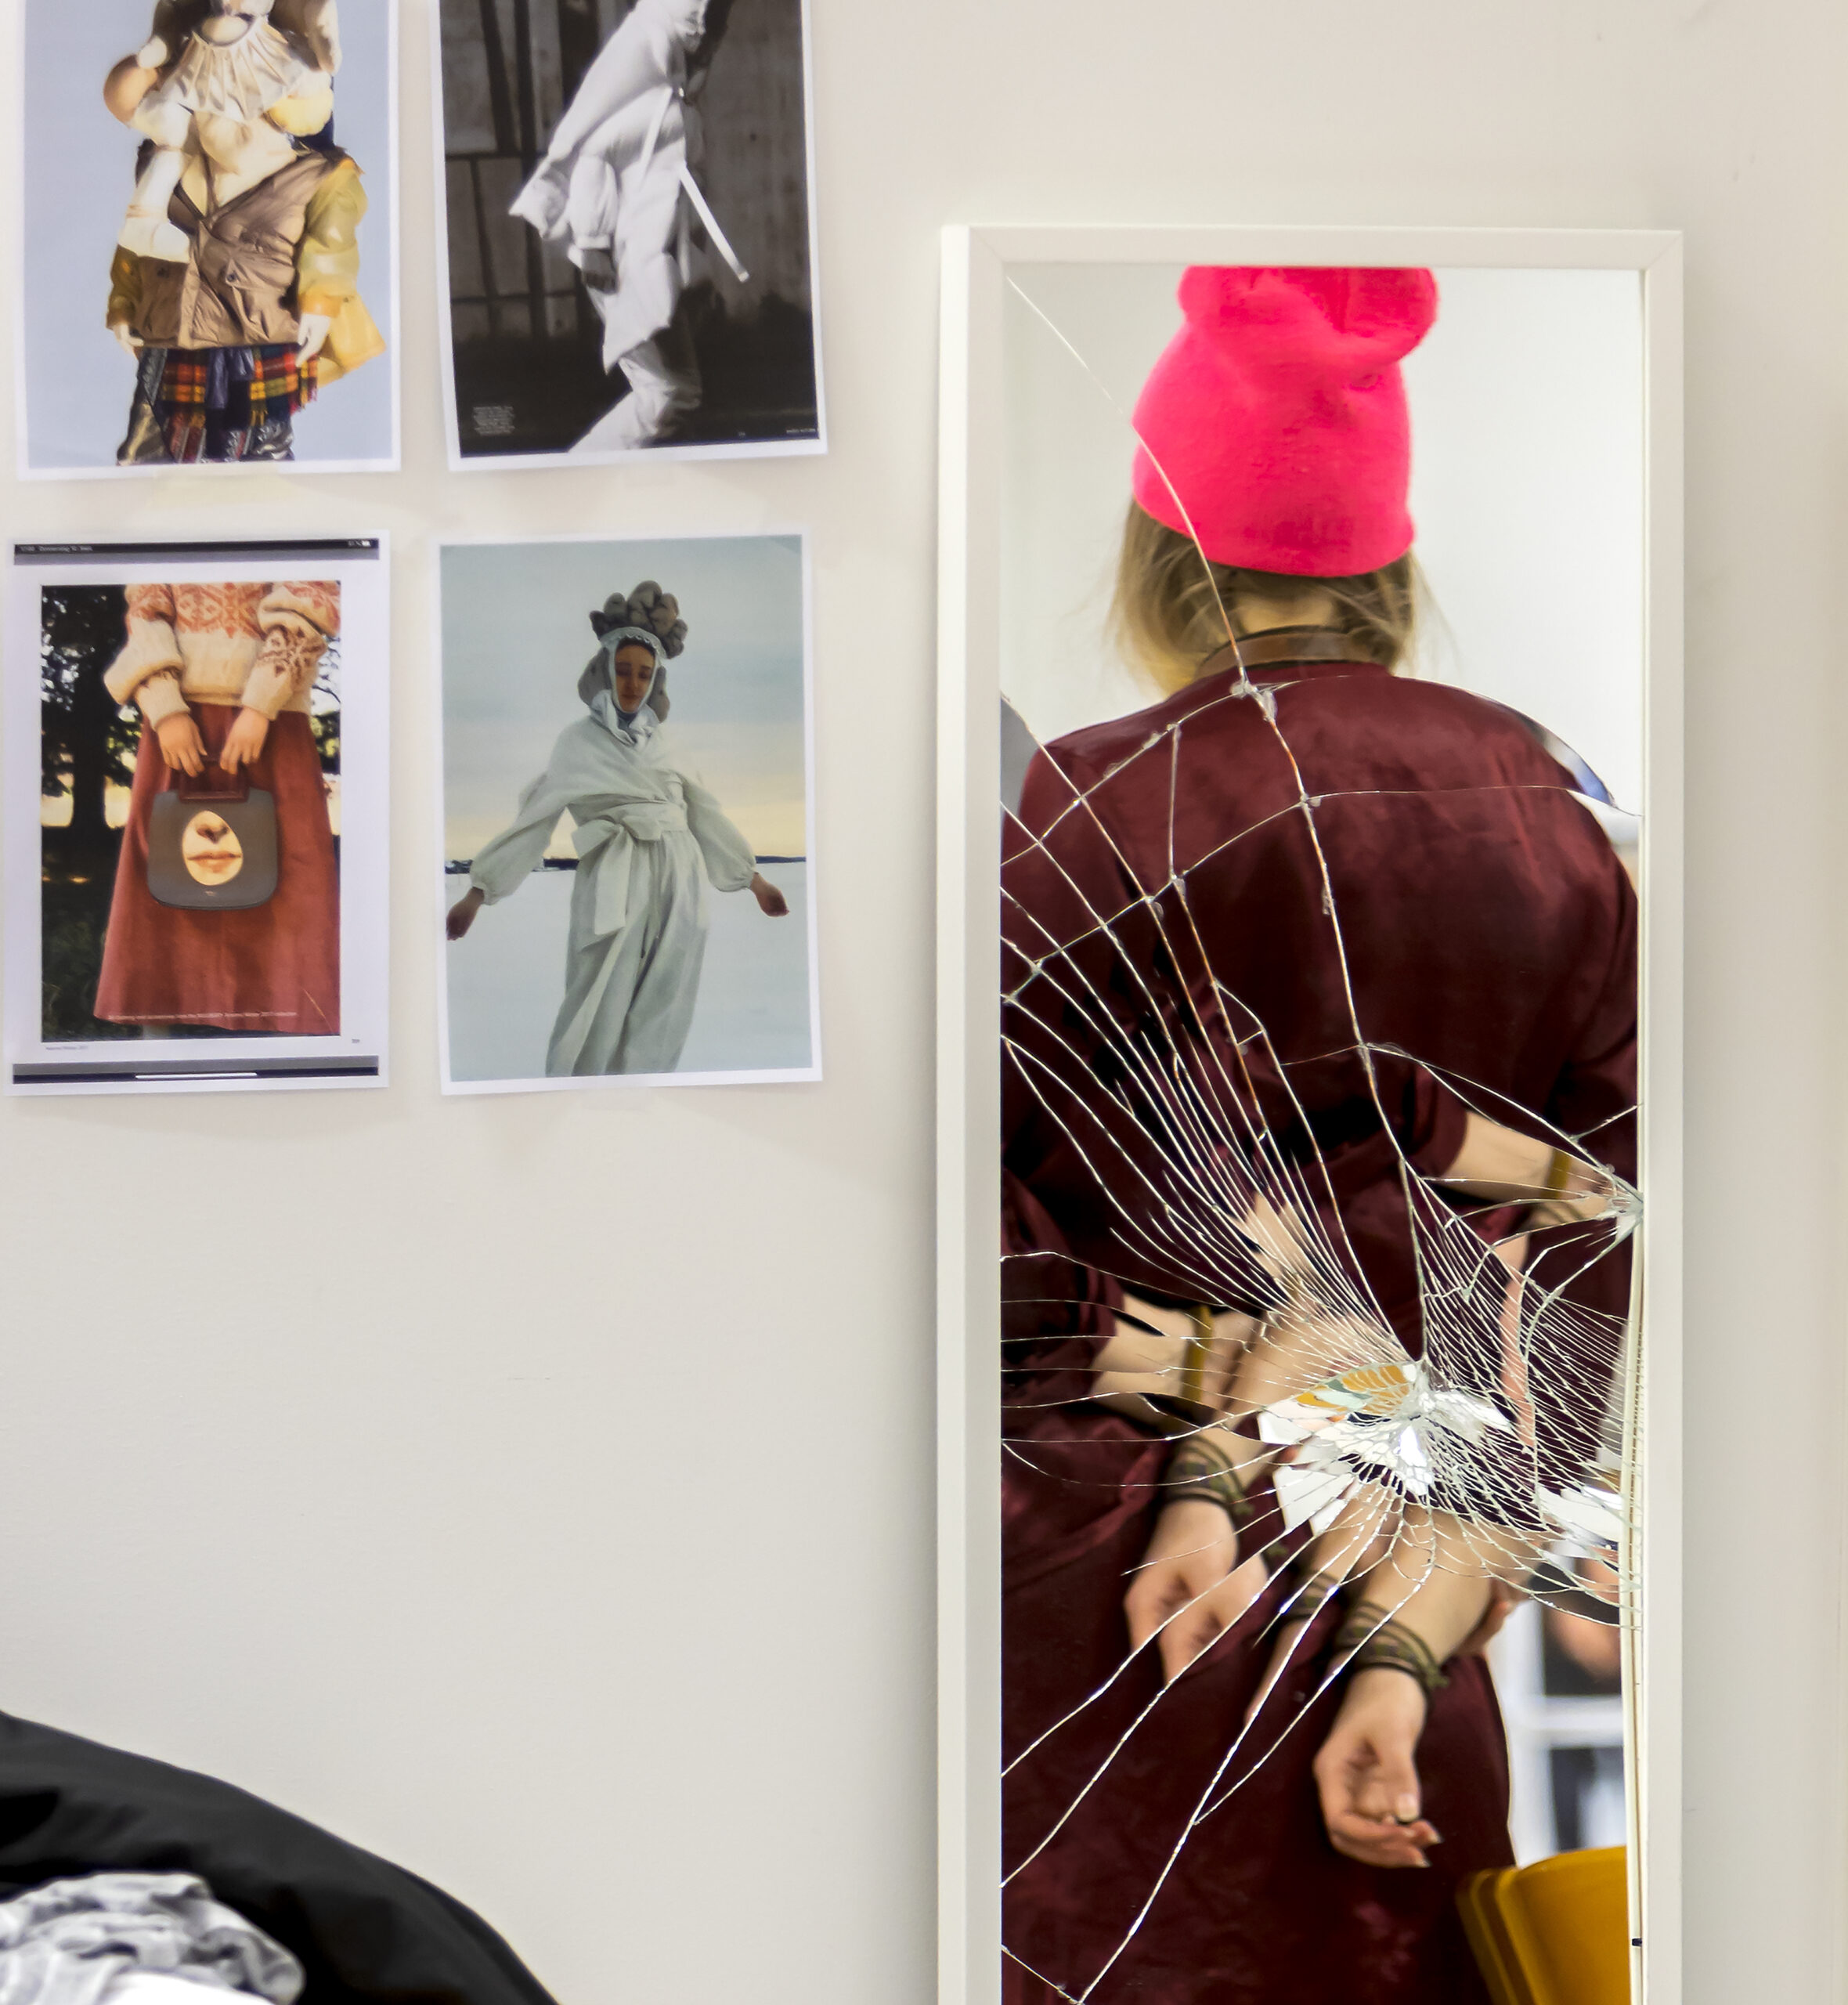 A broken mirror relfects a human figure. Pictures on the wall next to it.